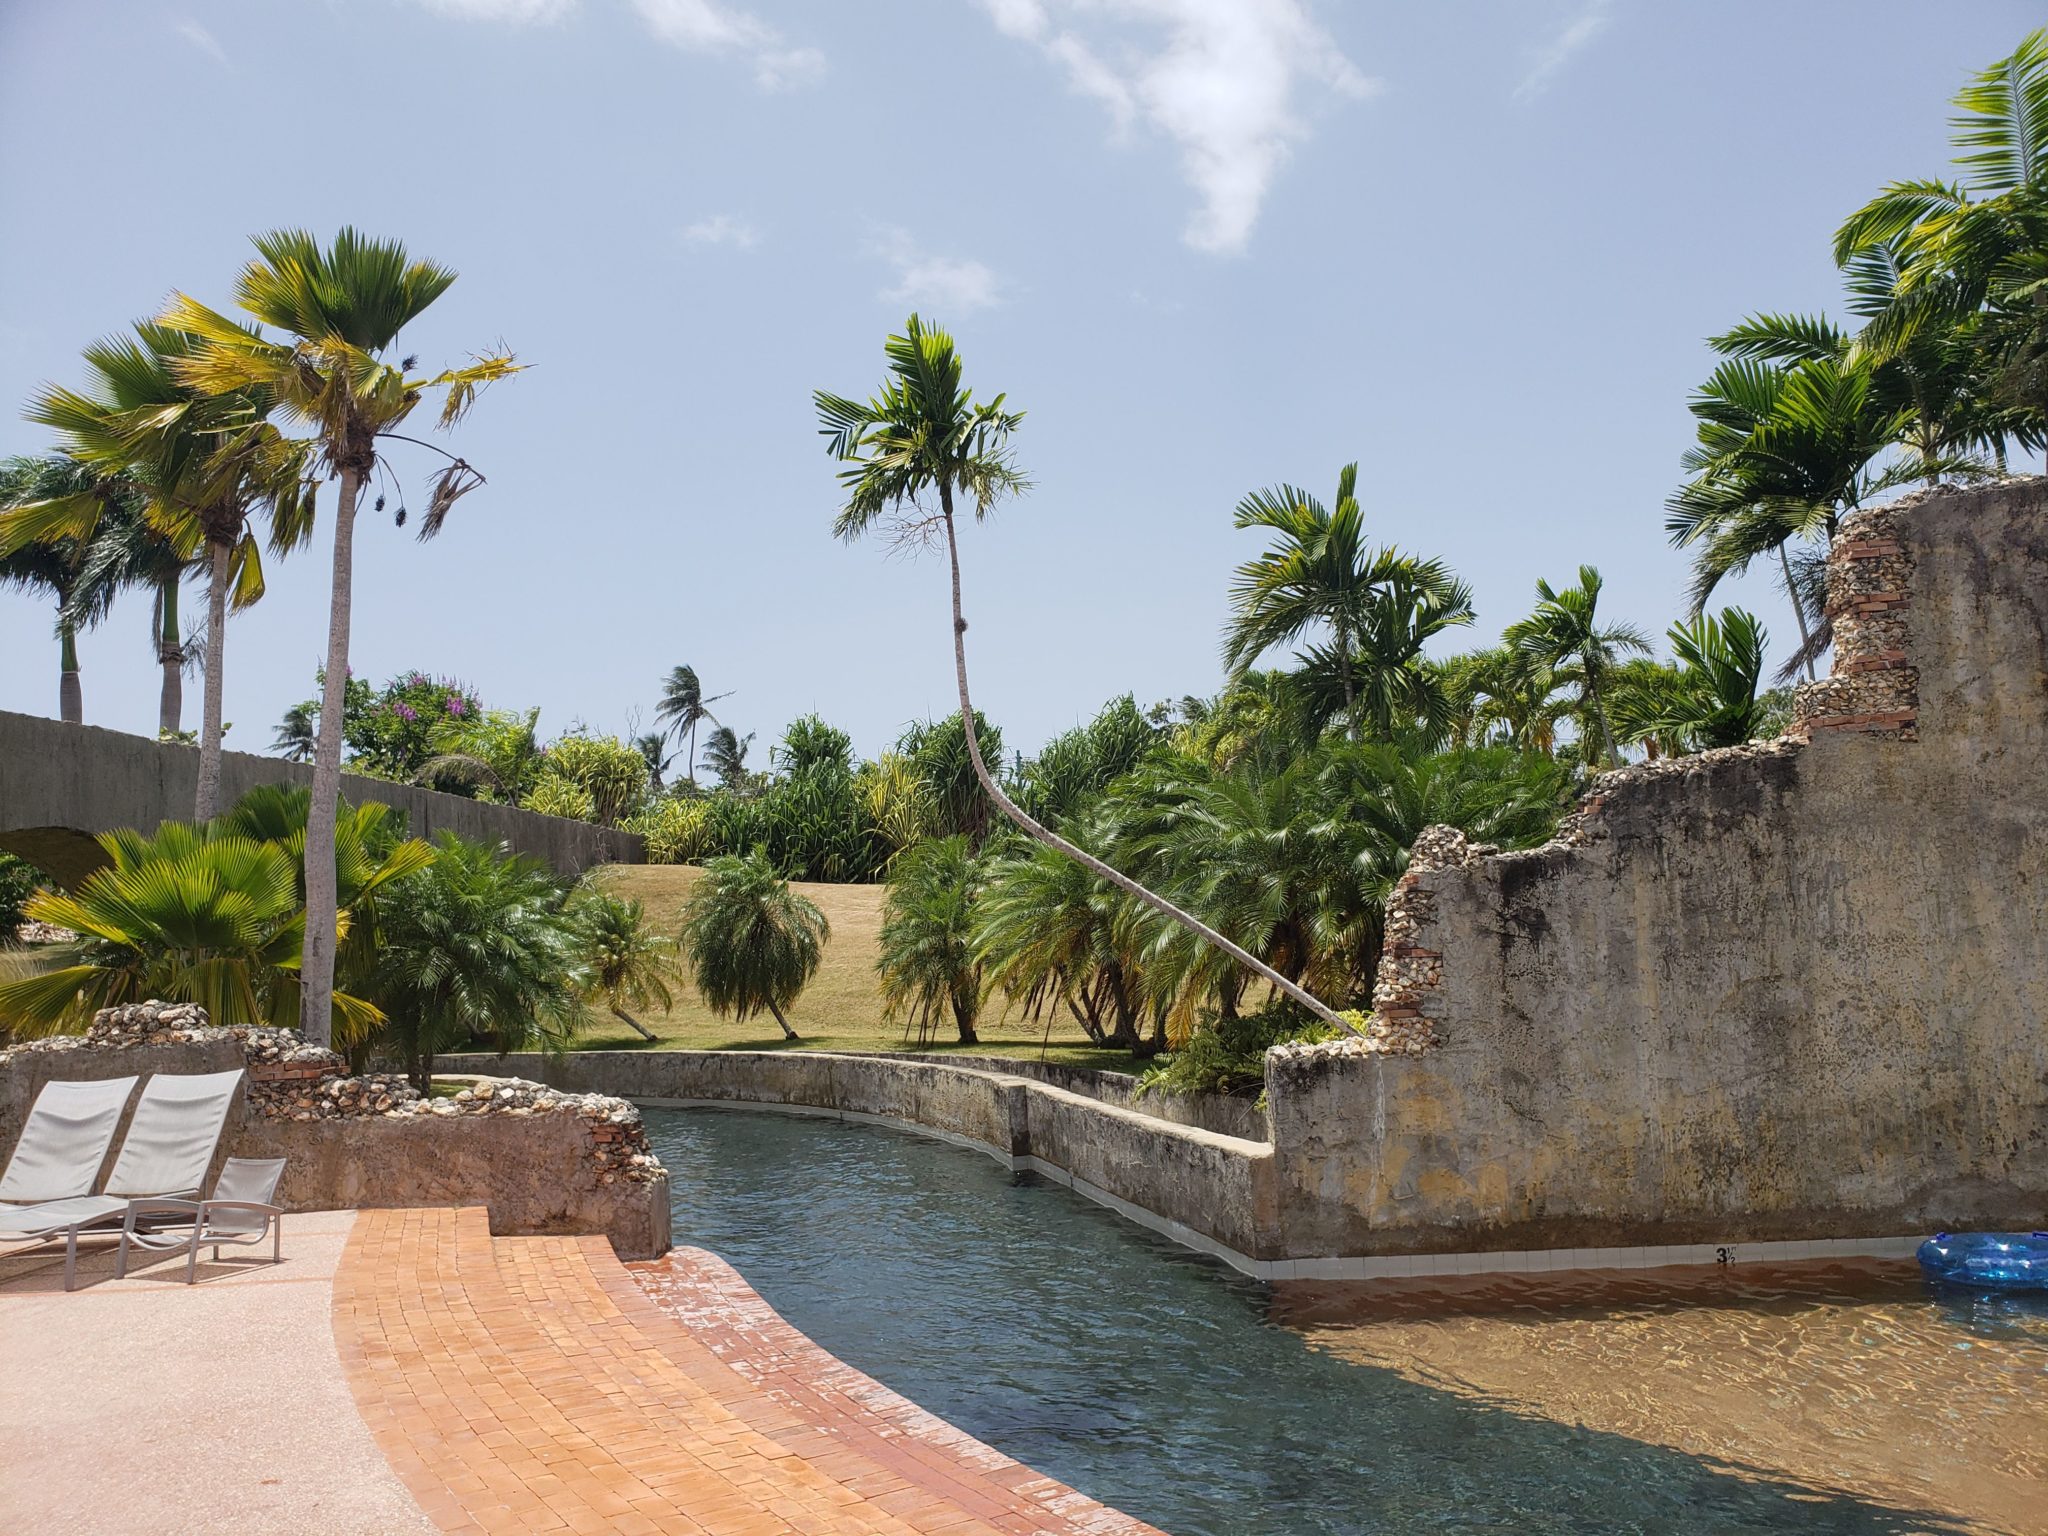 a water channel with palm trees and a brick walkway